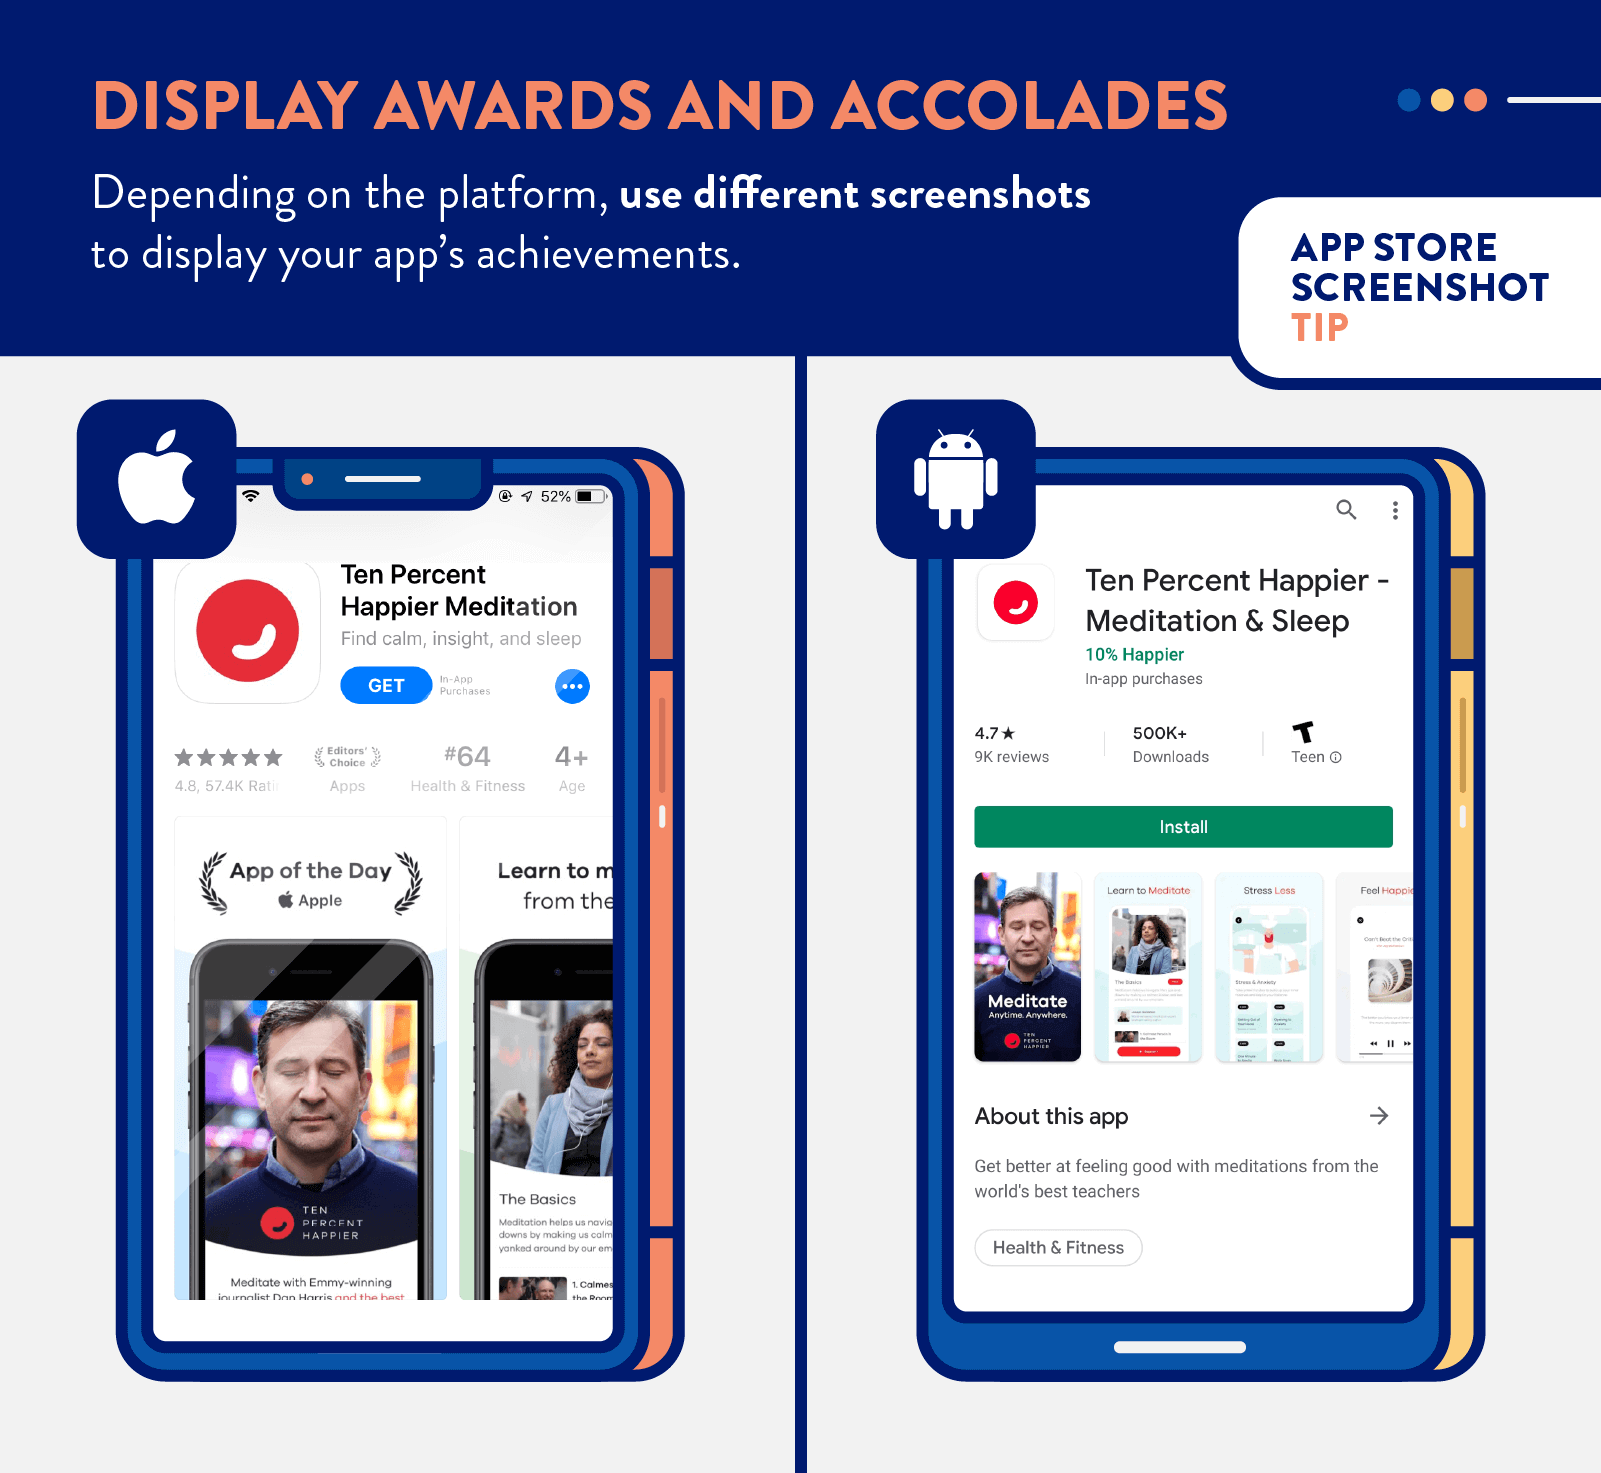 app store screenshots tip to display awards and accolades